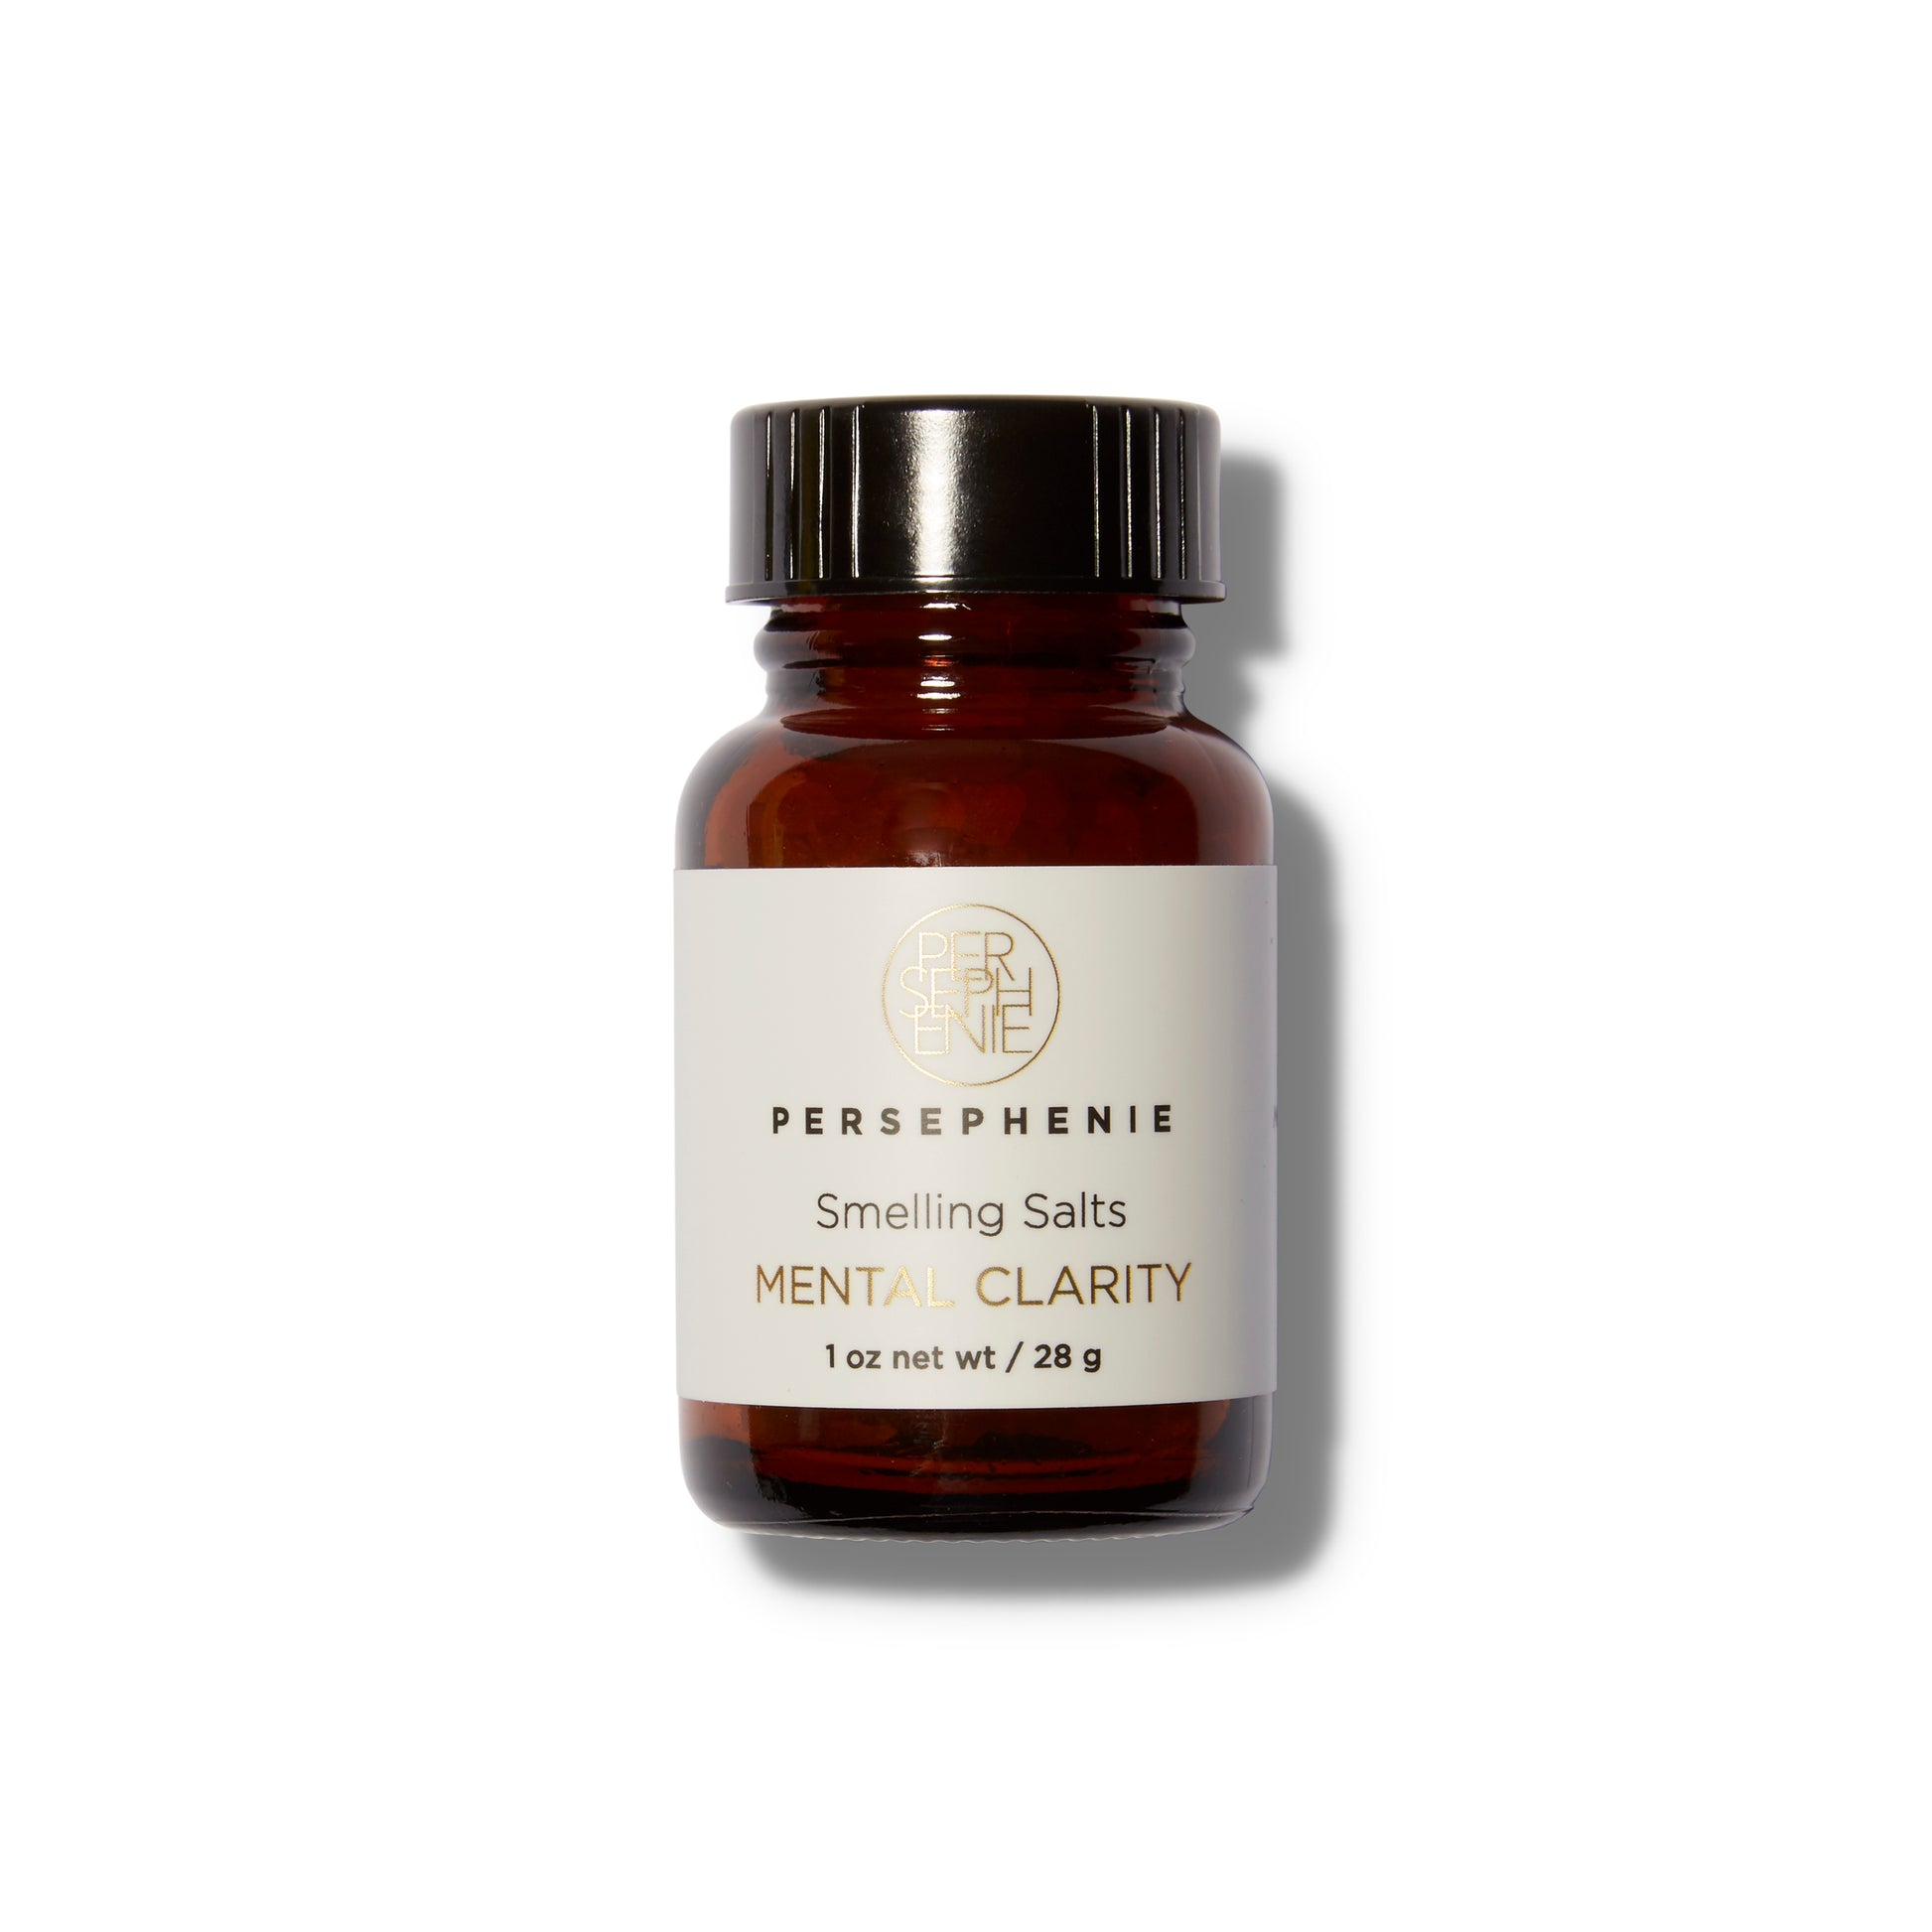 Front view of the Persephenie Mental Clarity Smelling Salts in a brown glass bottle.